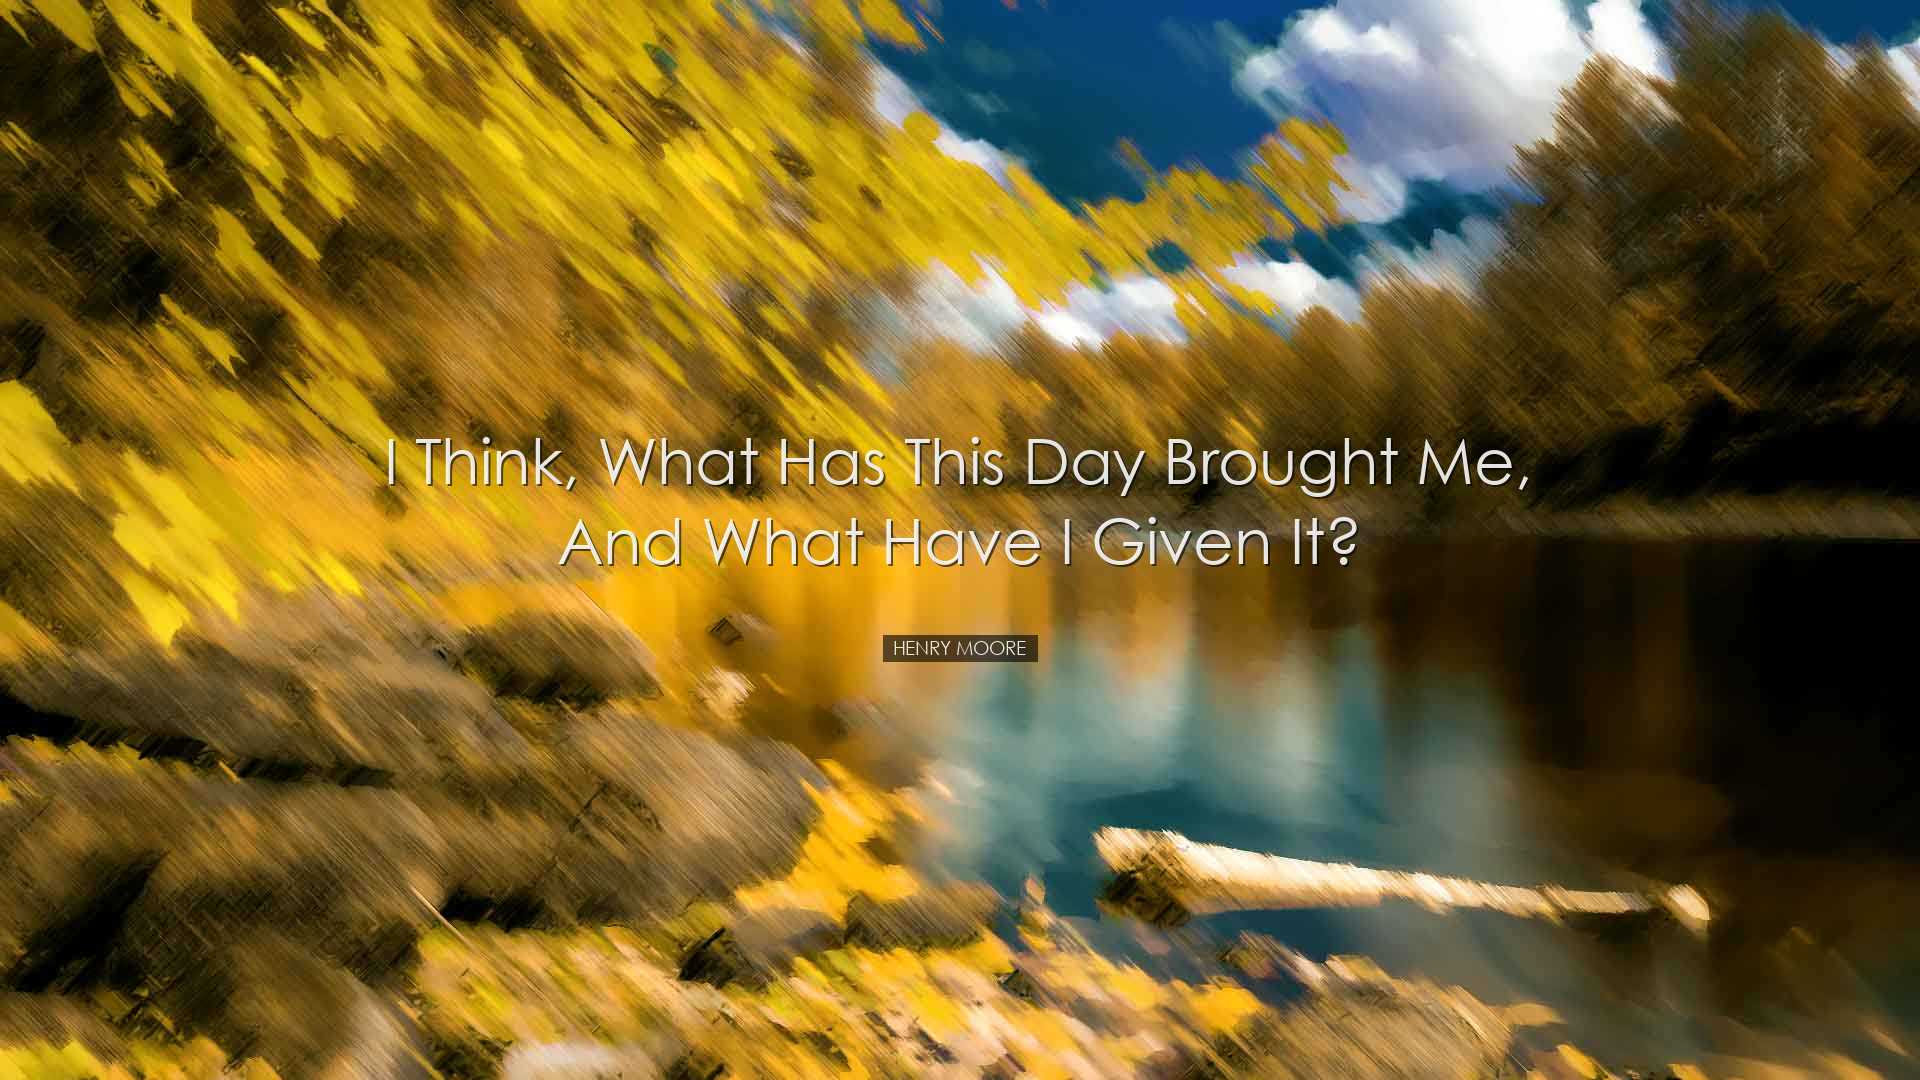 I think, what has this day brought me, and what have I given it? -